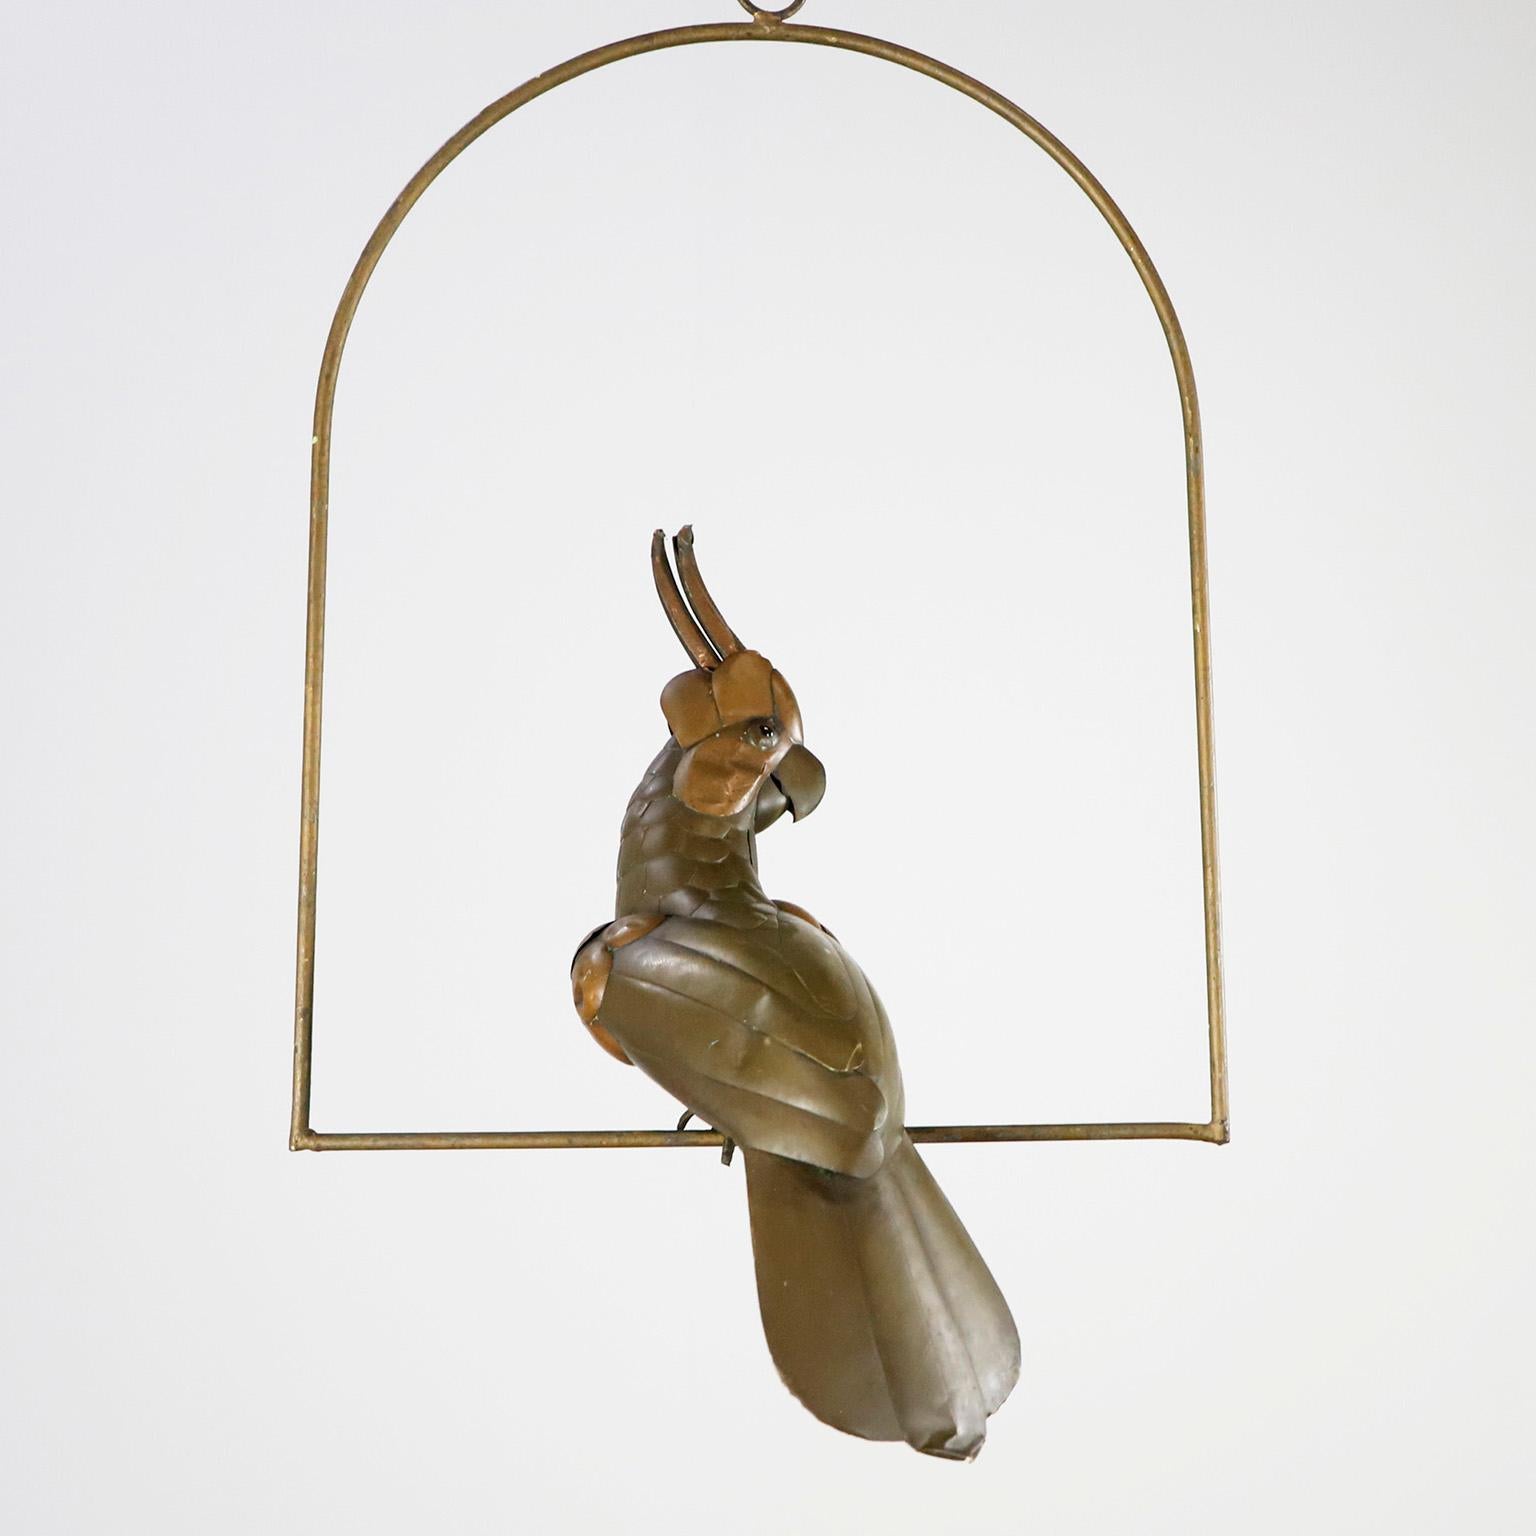 Copper, brass and aluminium Macaw on a hoop hanging stand by Sergio Bustamante, circa 1960. Presents some damages.

Sergio Bustamante is a Mexican Artist and sculptor. He began with paintings and papier mache figures, inaugurating the first exhibit